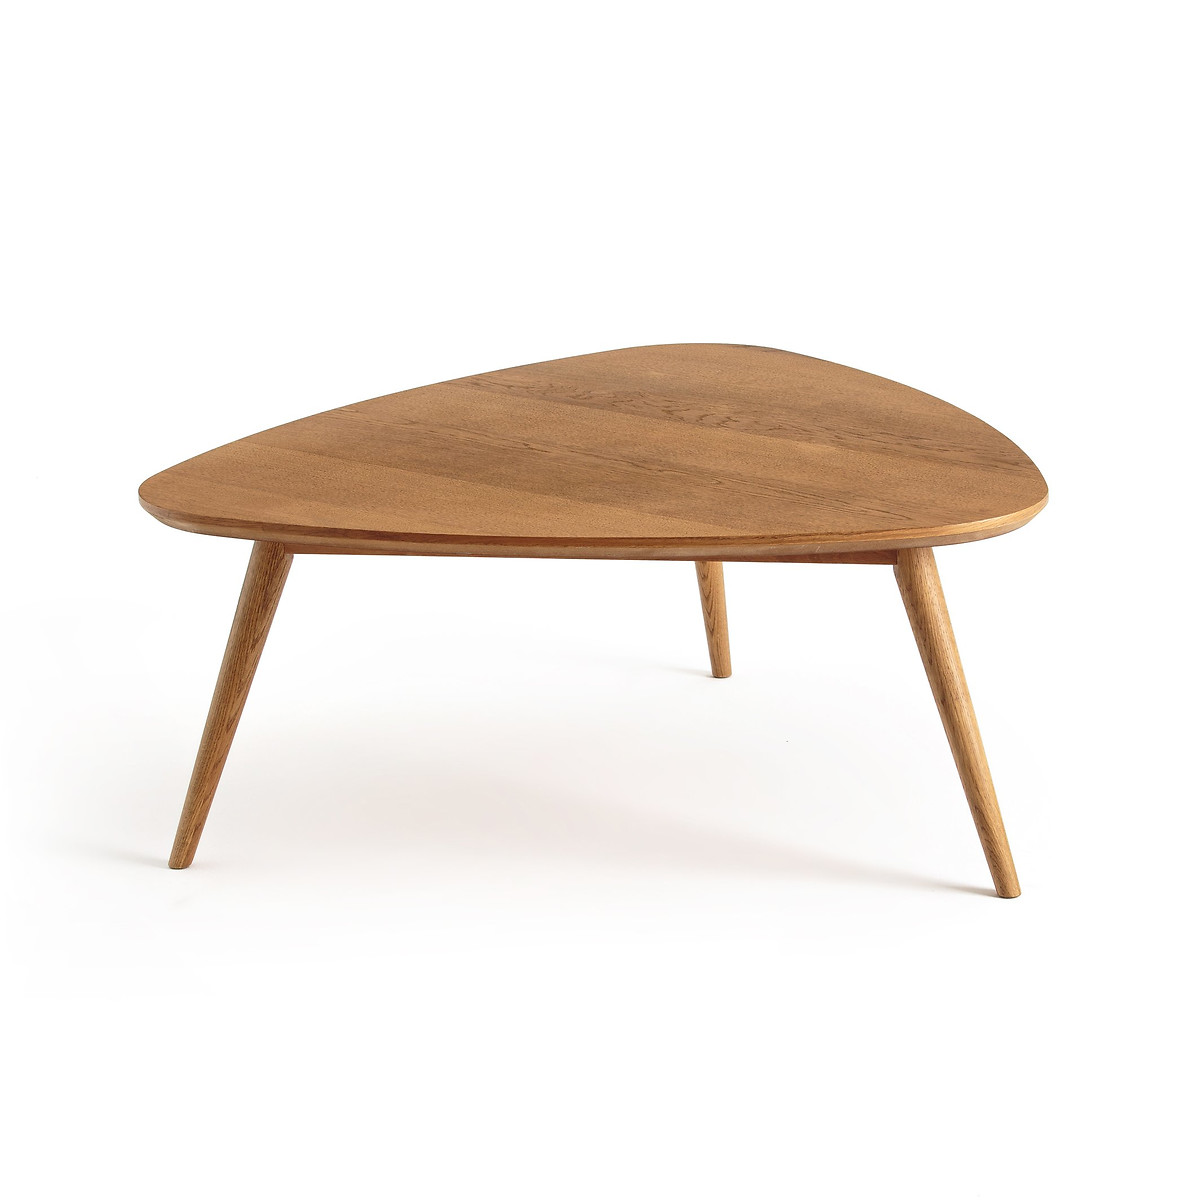 Quilda Vintage Style Oak Coffee Table